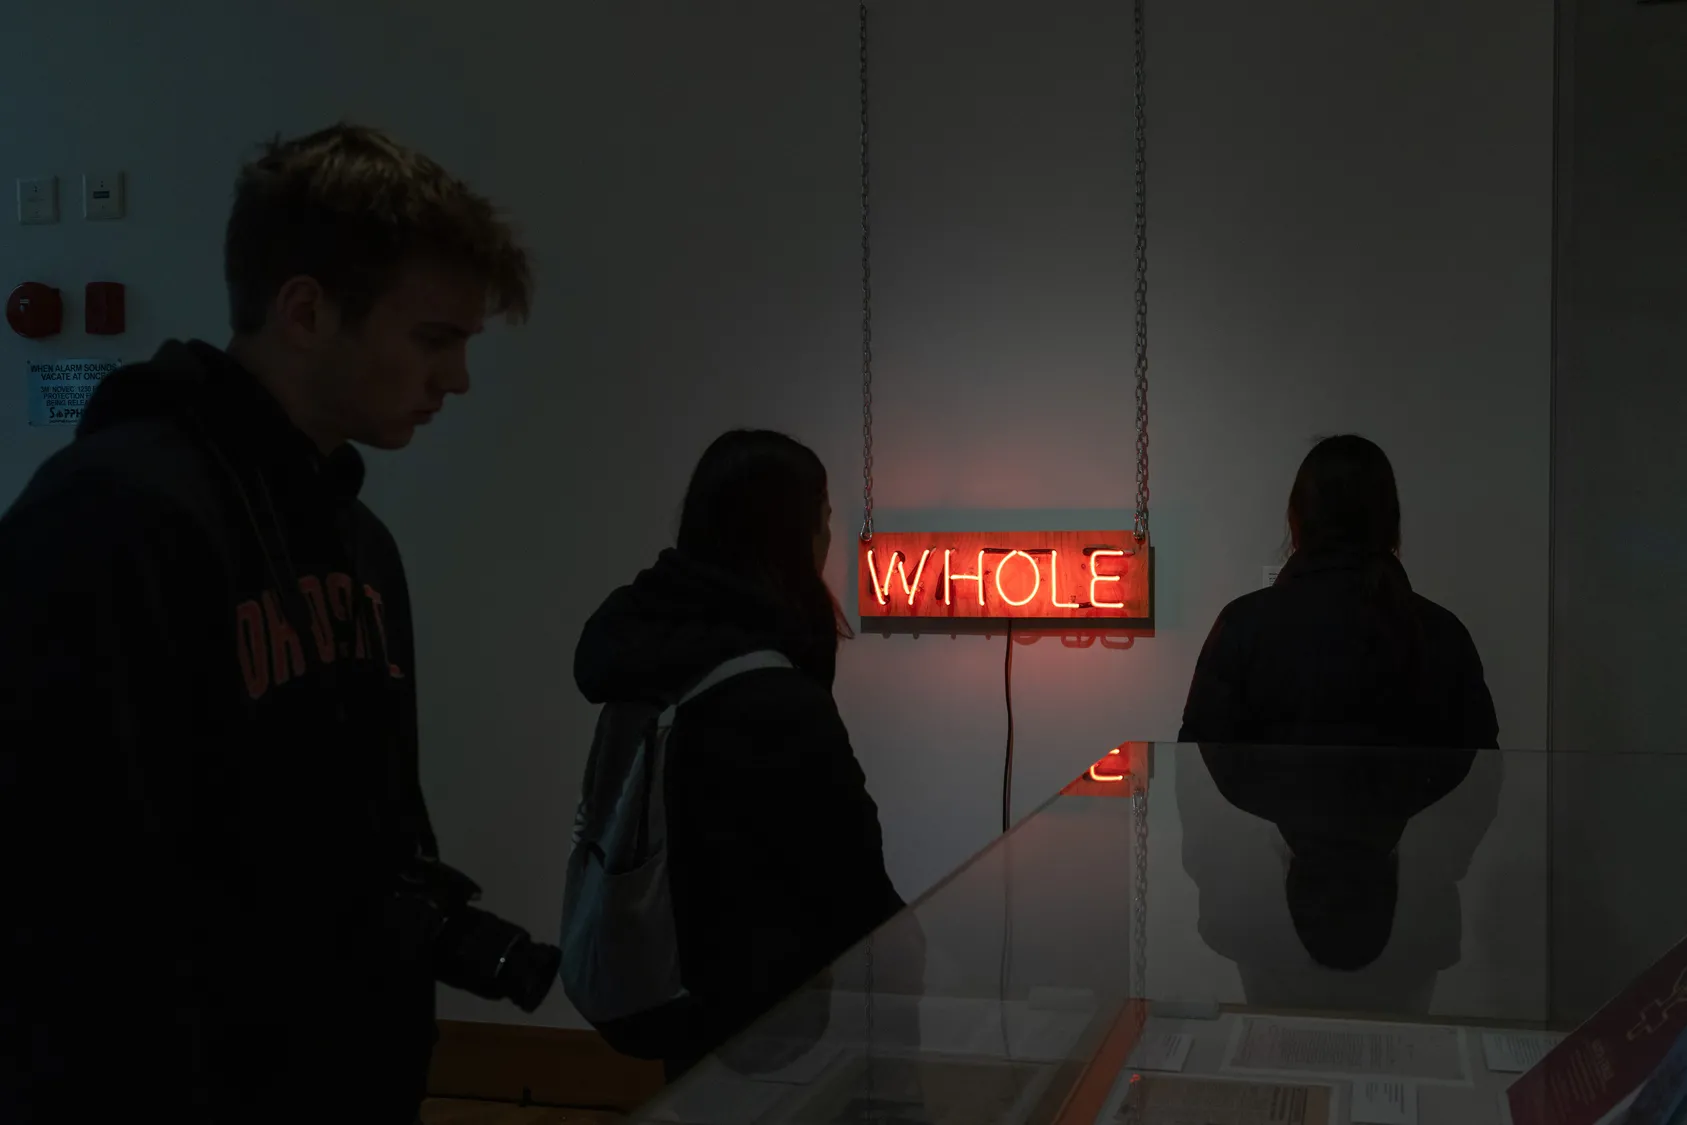 In a dimly lit photo, darker silhouettes of three people can be made out. On the light-colored wall, a neon sign hangs at throat-height of two silhouettes beside it. It says “whole.” 